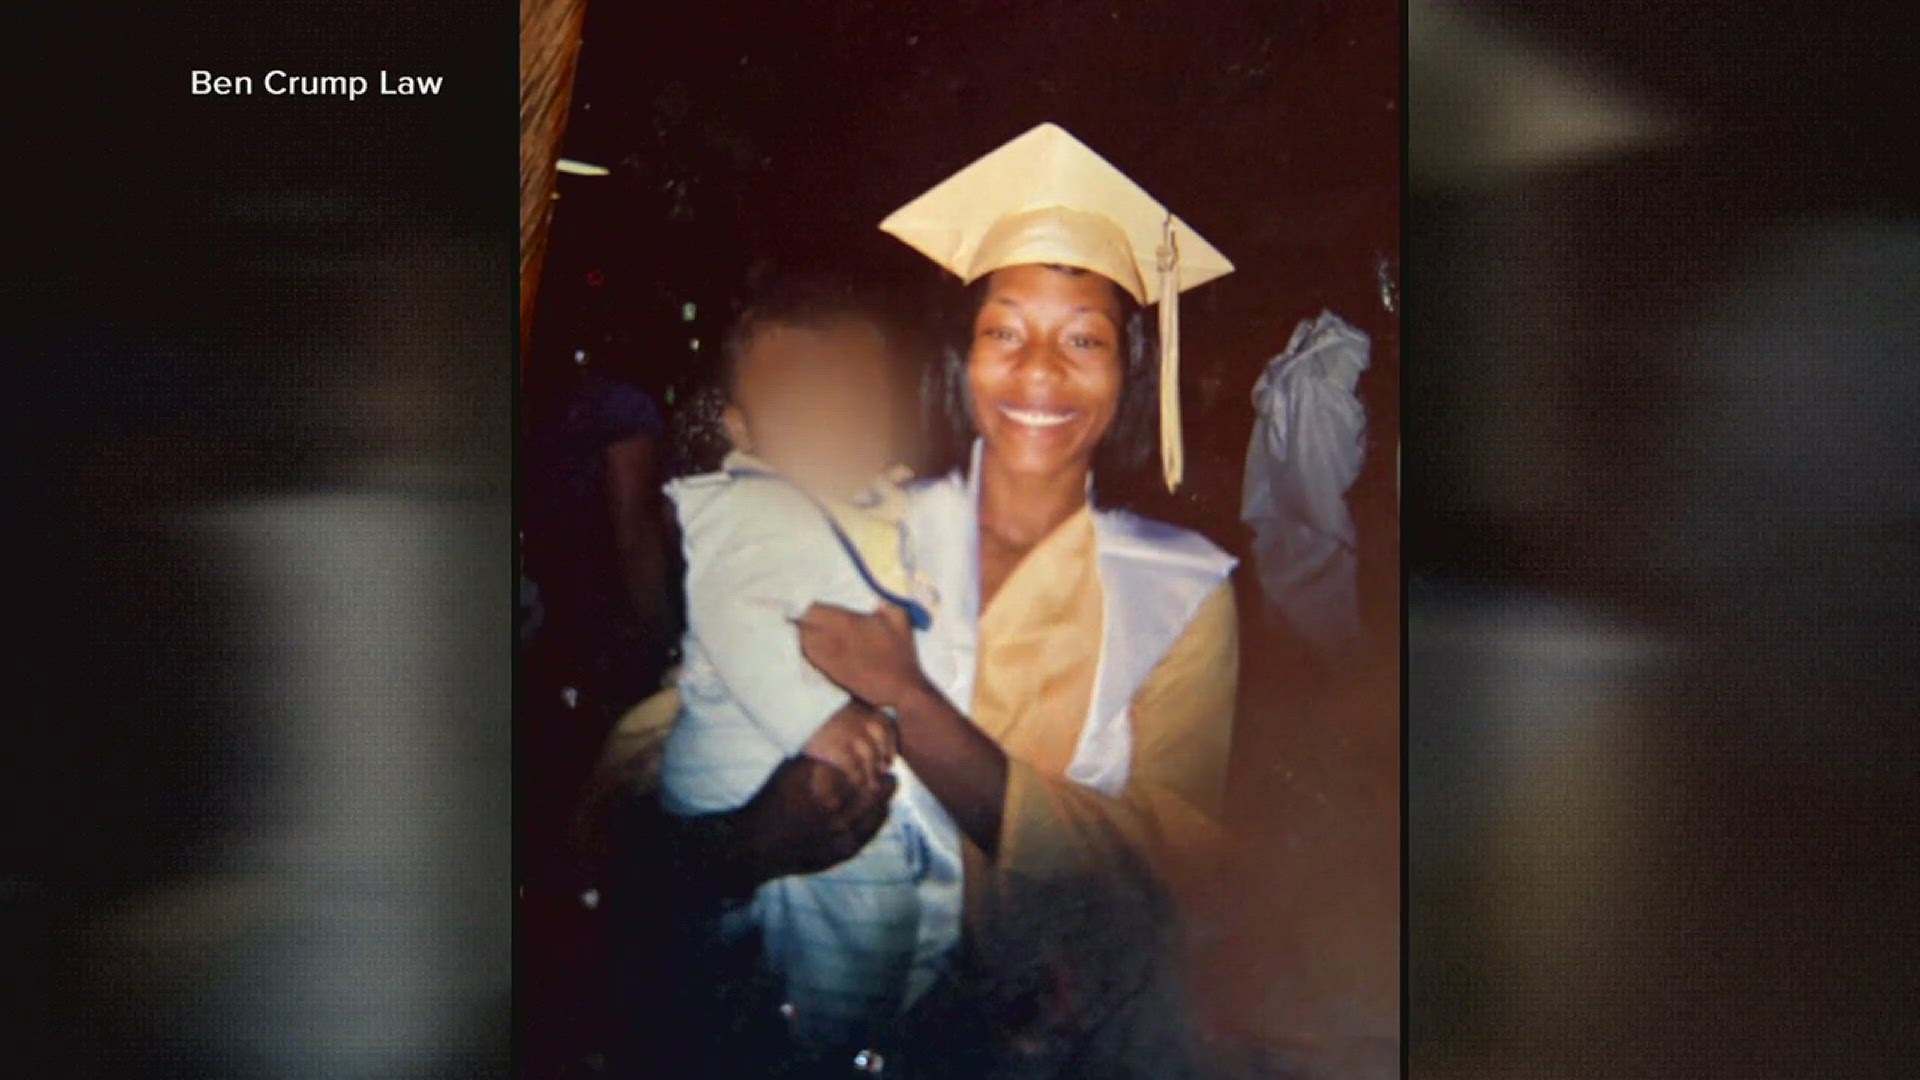 Records released by Illinois authorities show that two emergency response calls were made from the home of Sonya Massey in the days leading up to her death.